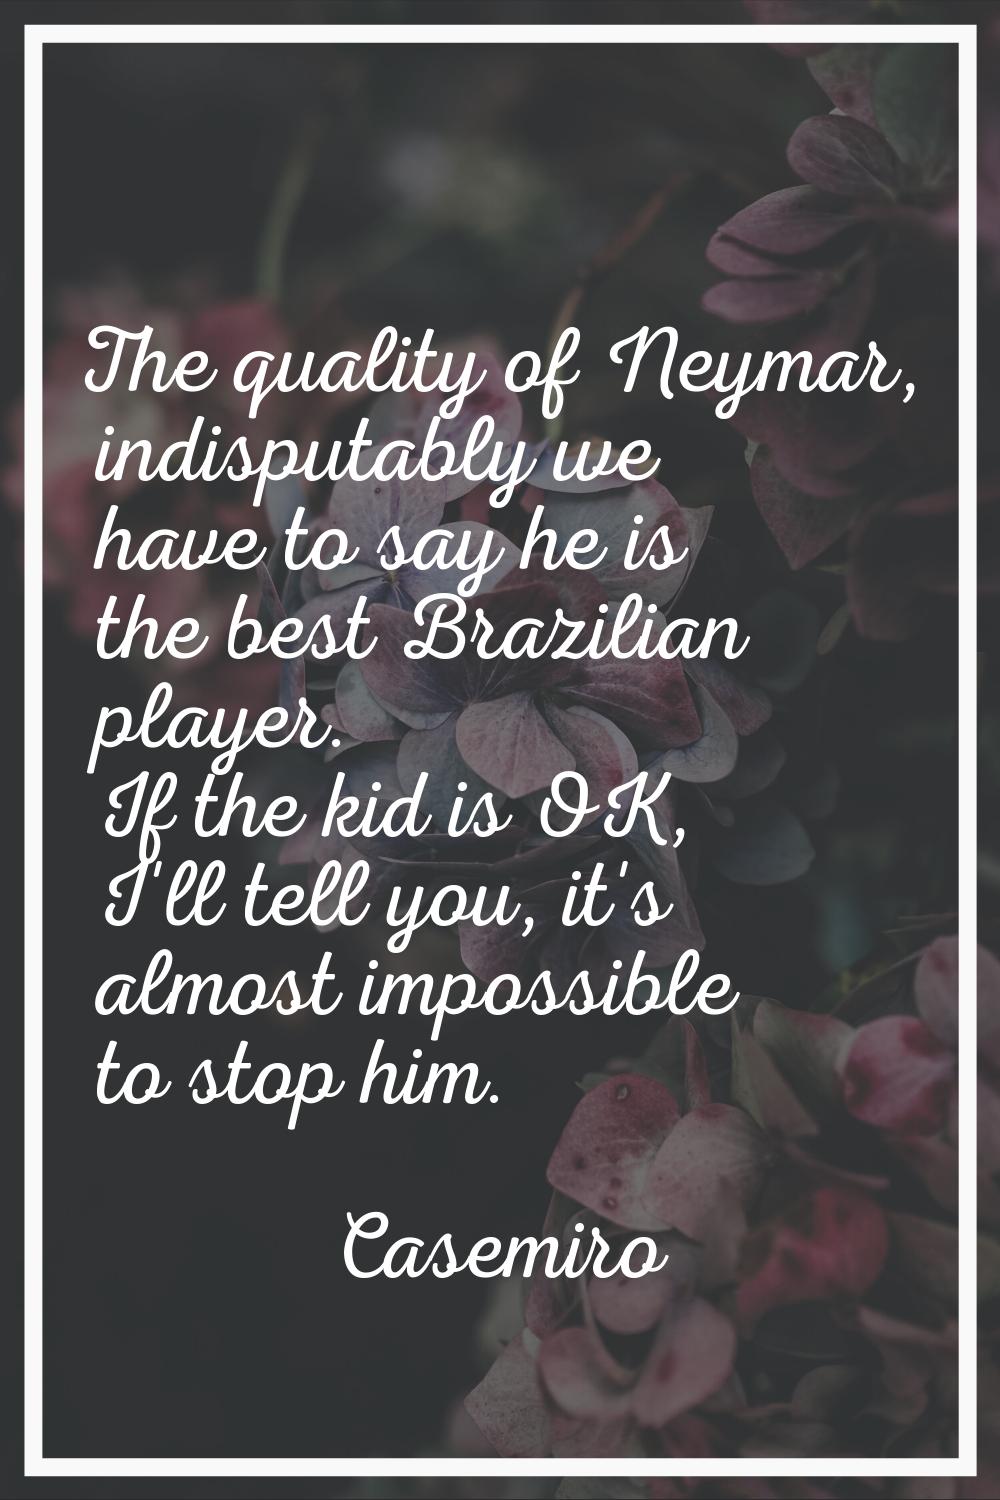 The quality of Neymar, indisputably we have to say he is the best Brazilian player. If the kid is O